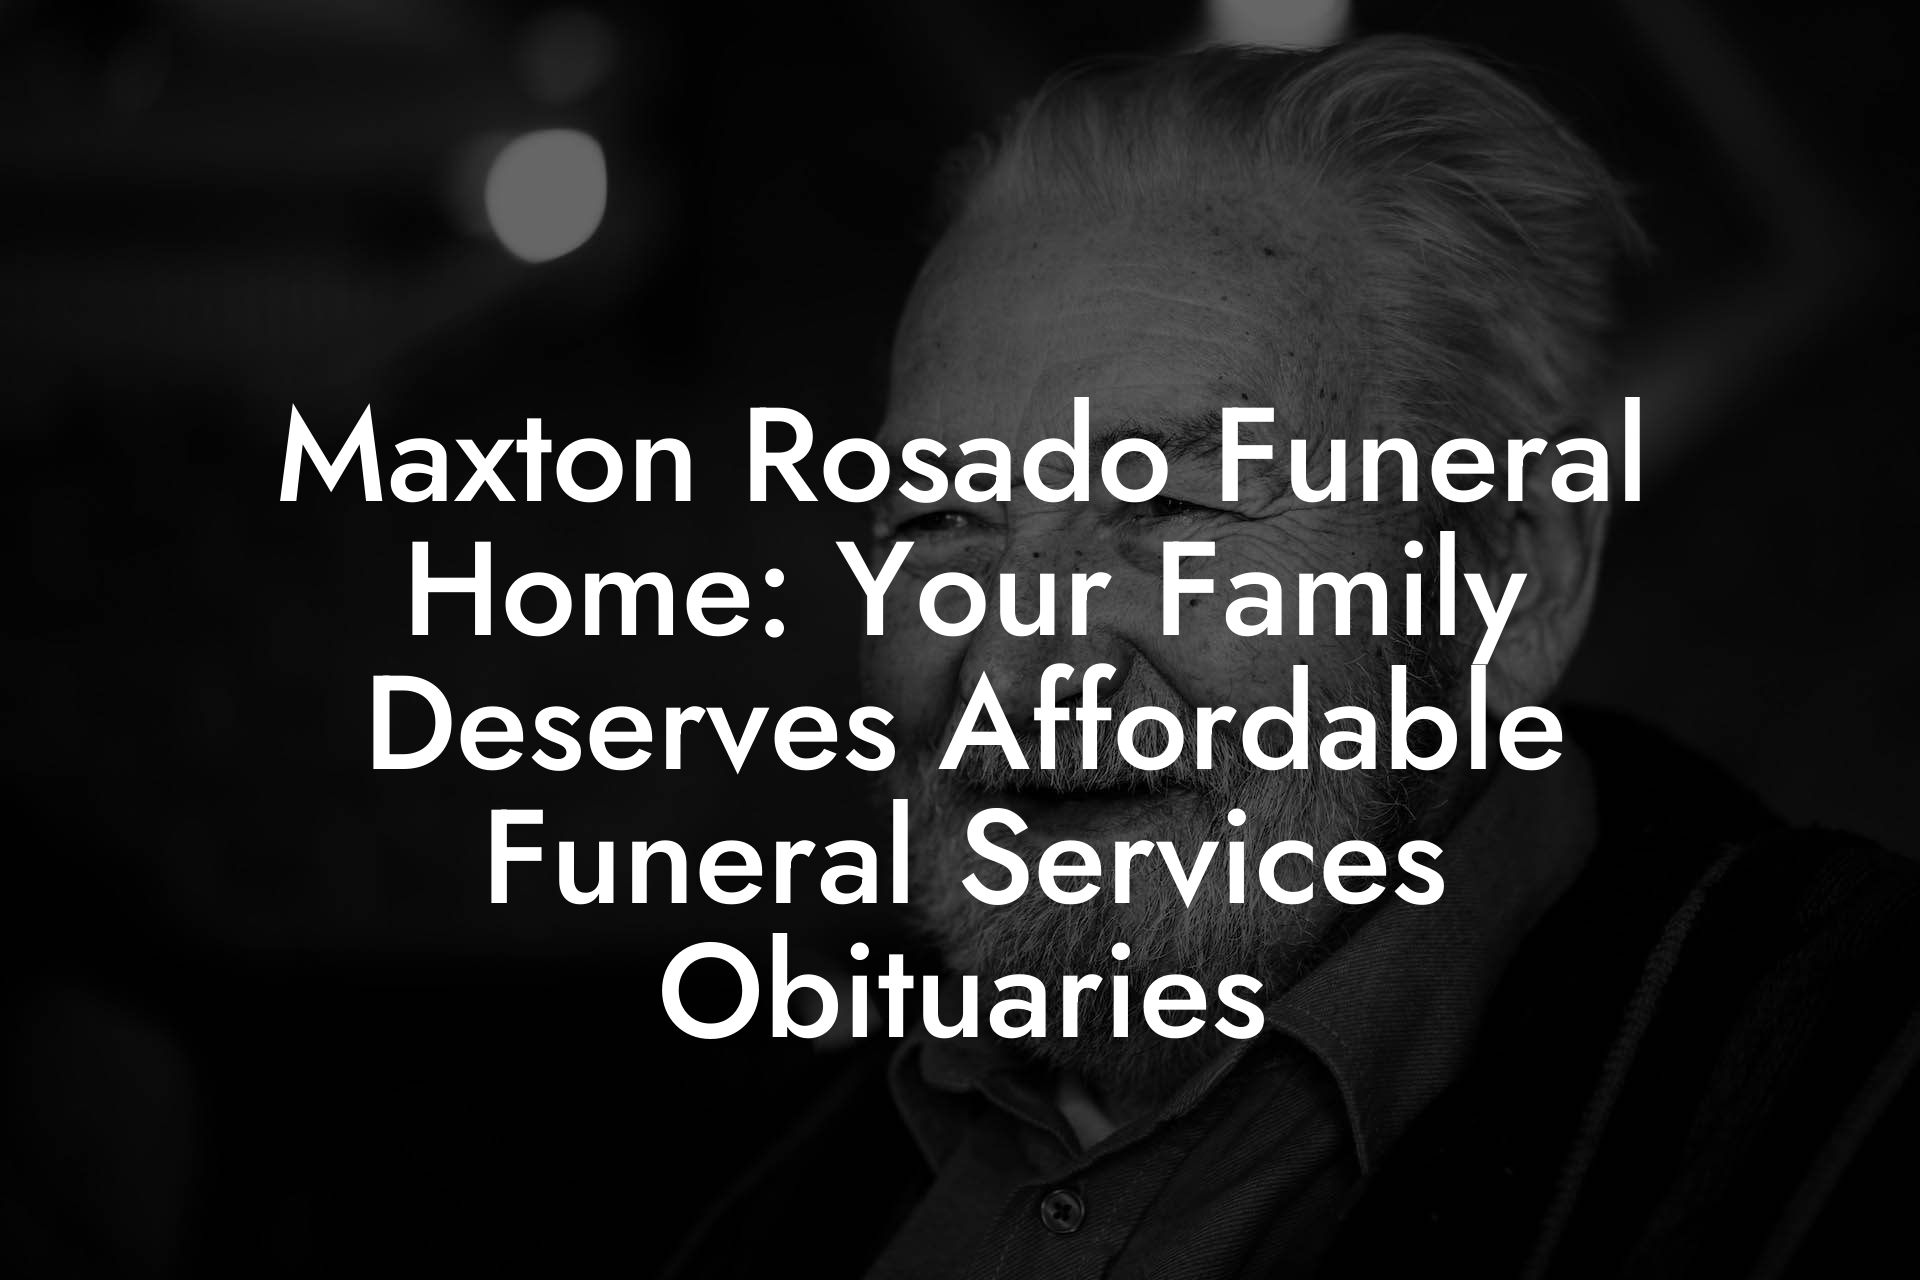 Maxton Rosado Funeral Home: Your Family Deserves Affordable Funeral Services Obituaries